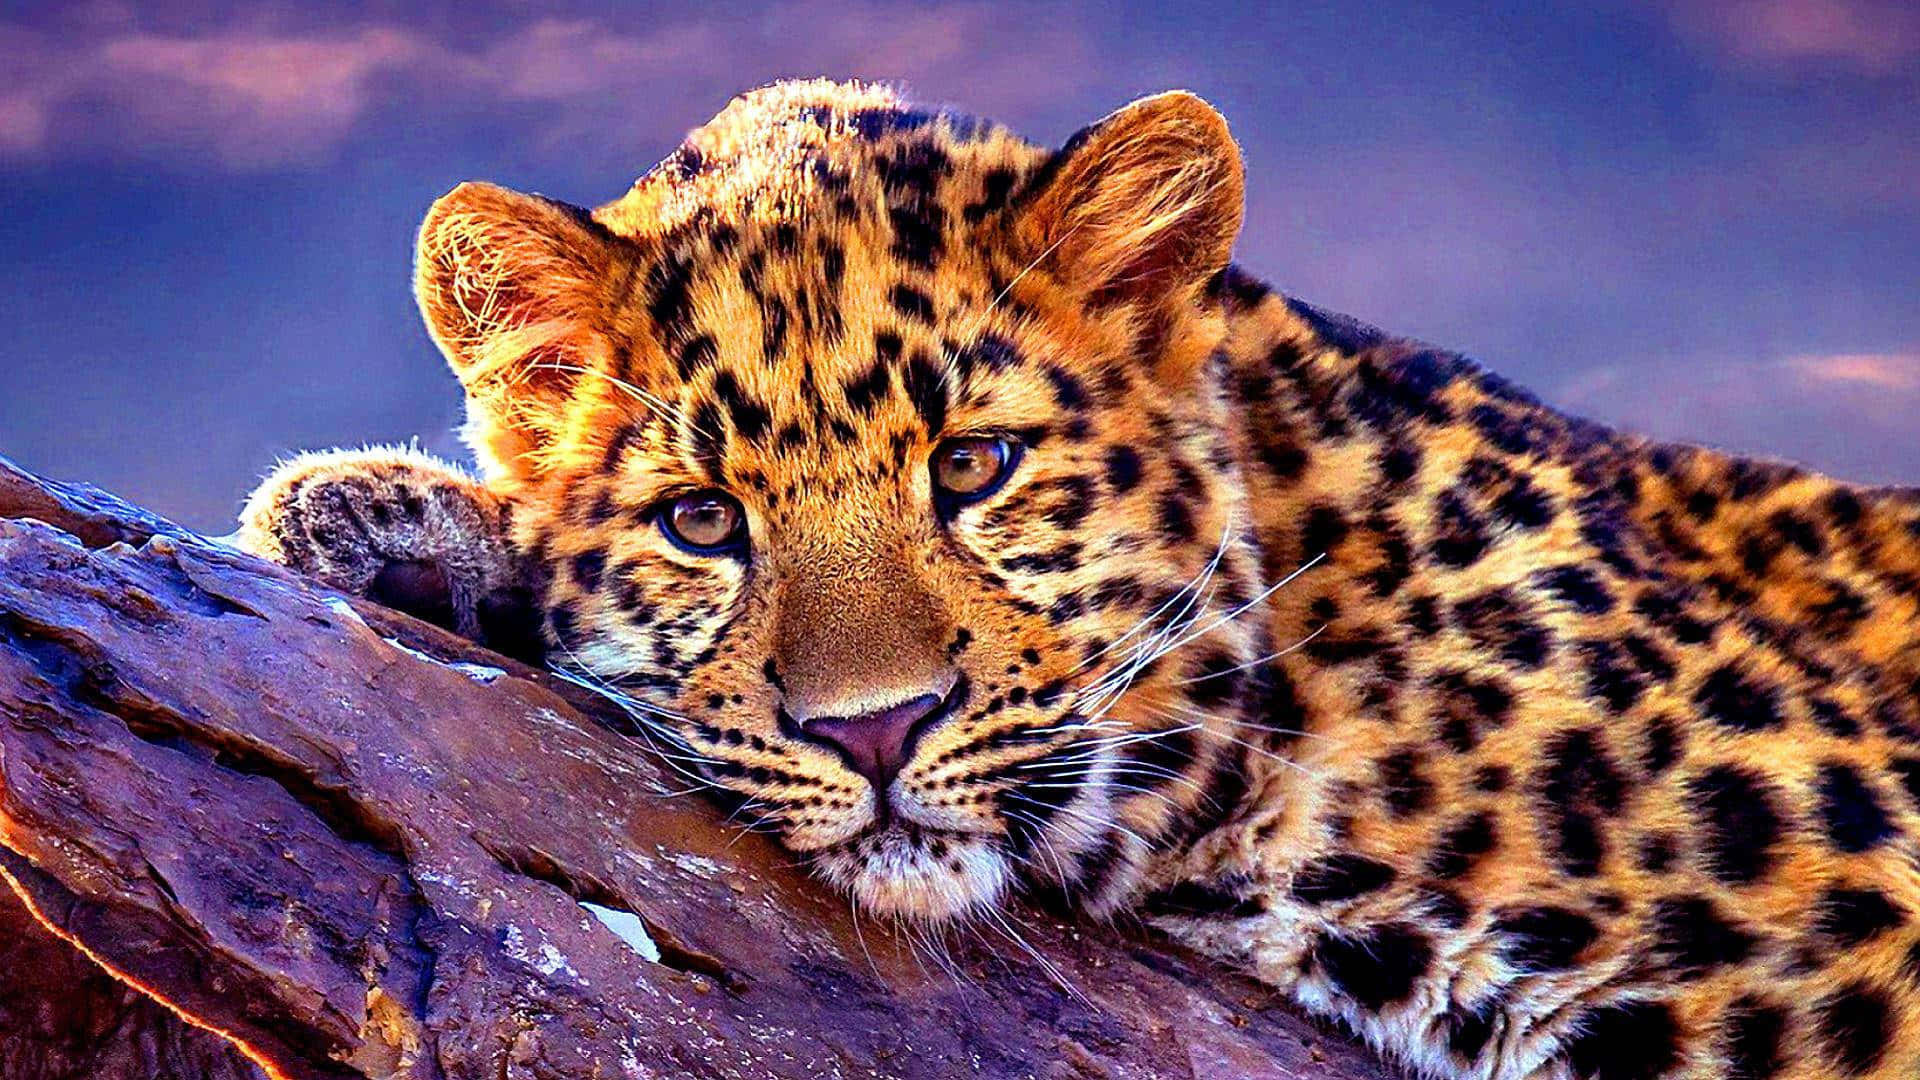 Leopard Lying Down On Rock Picture